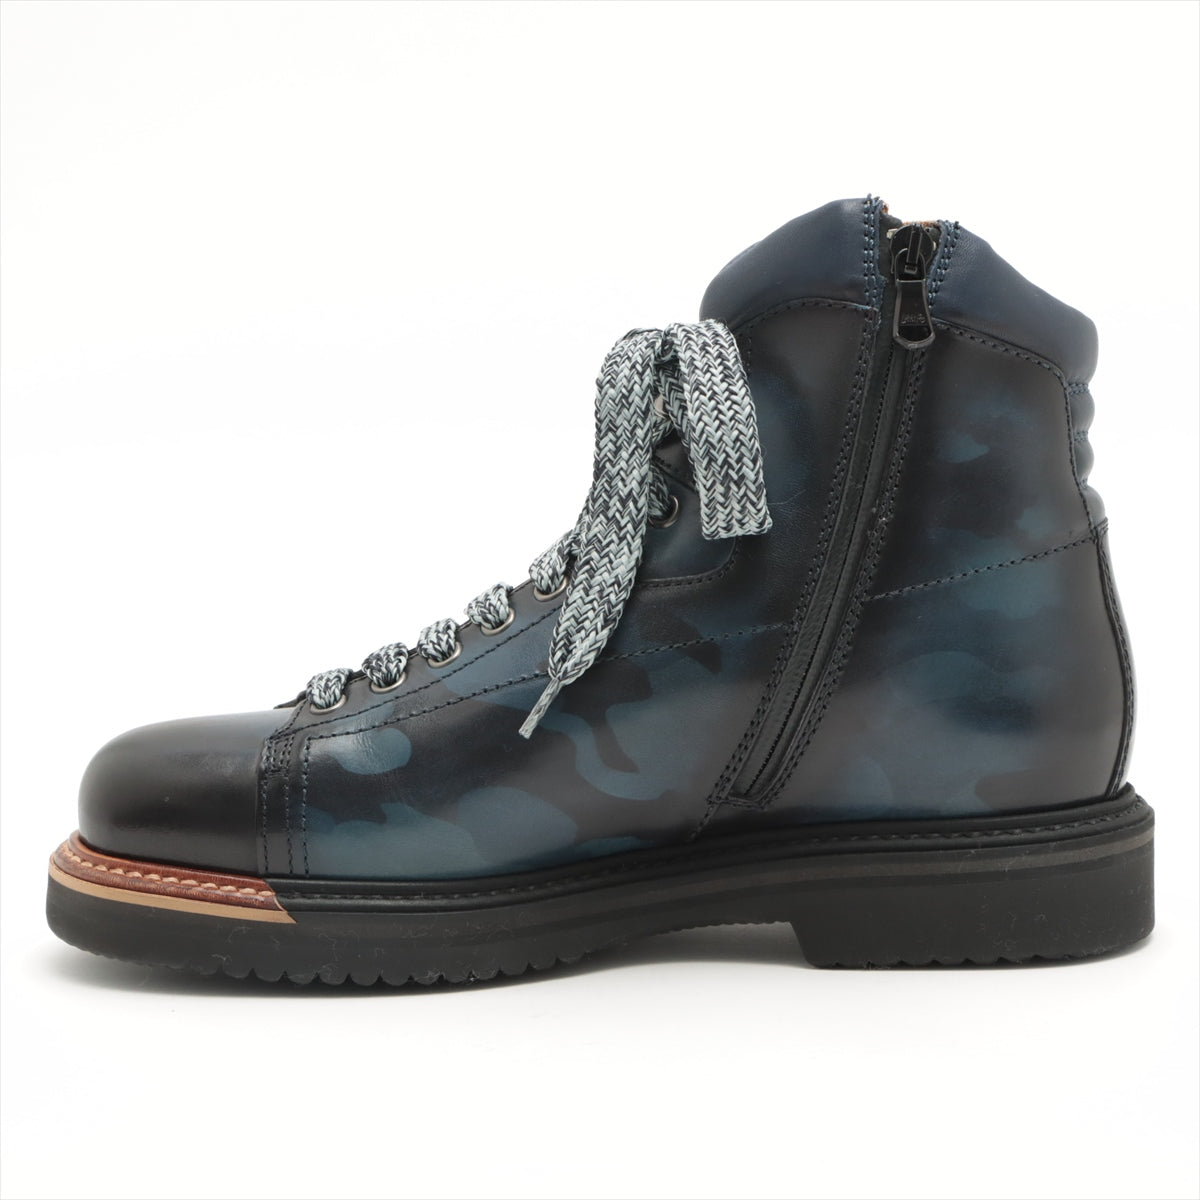 Santoni Leather Short Boots 5 1/2 Men's Blue Camouflage pattern vibram sole box sack Is there a replacement string